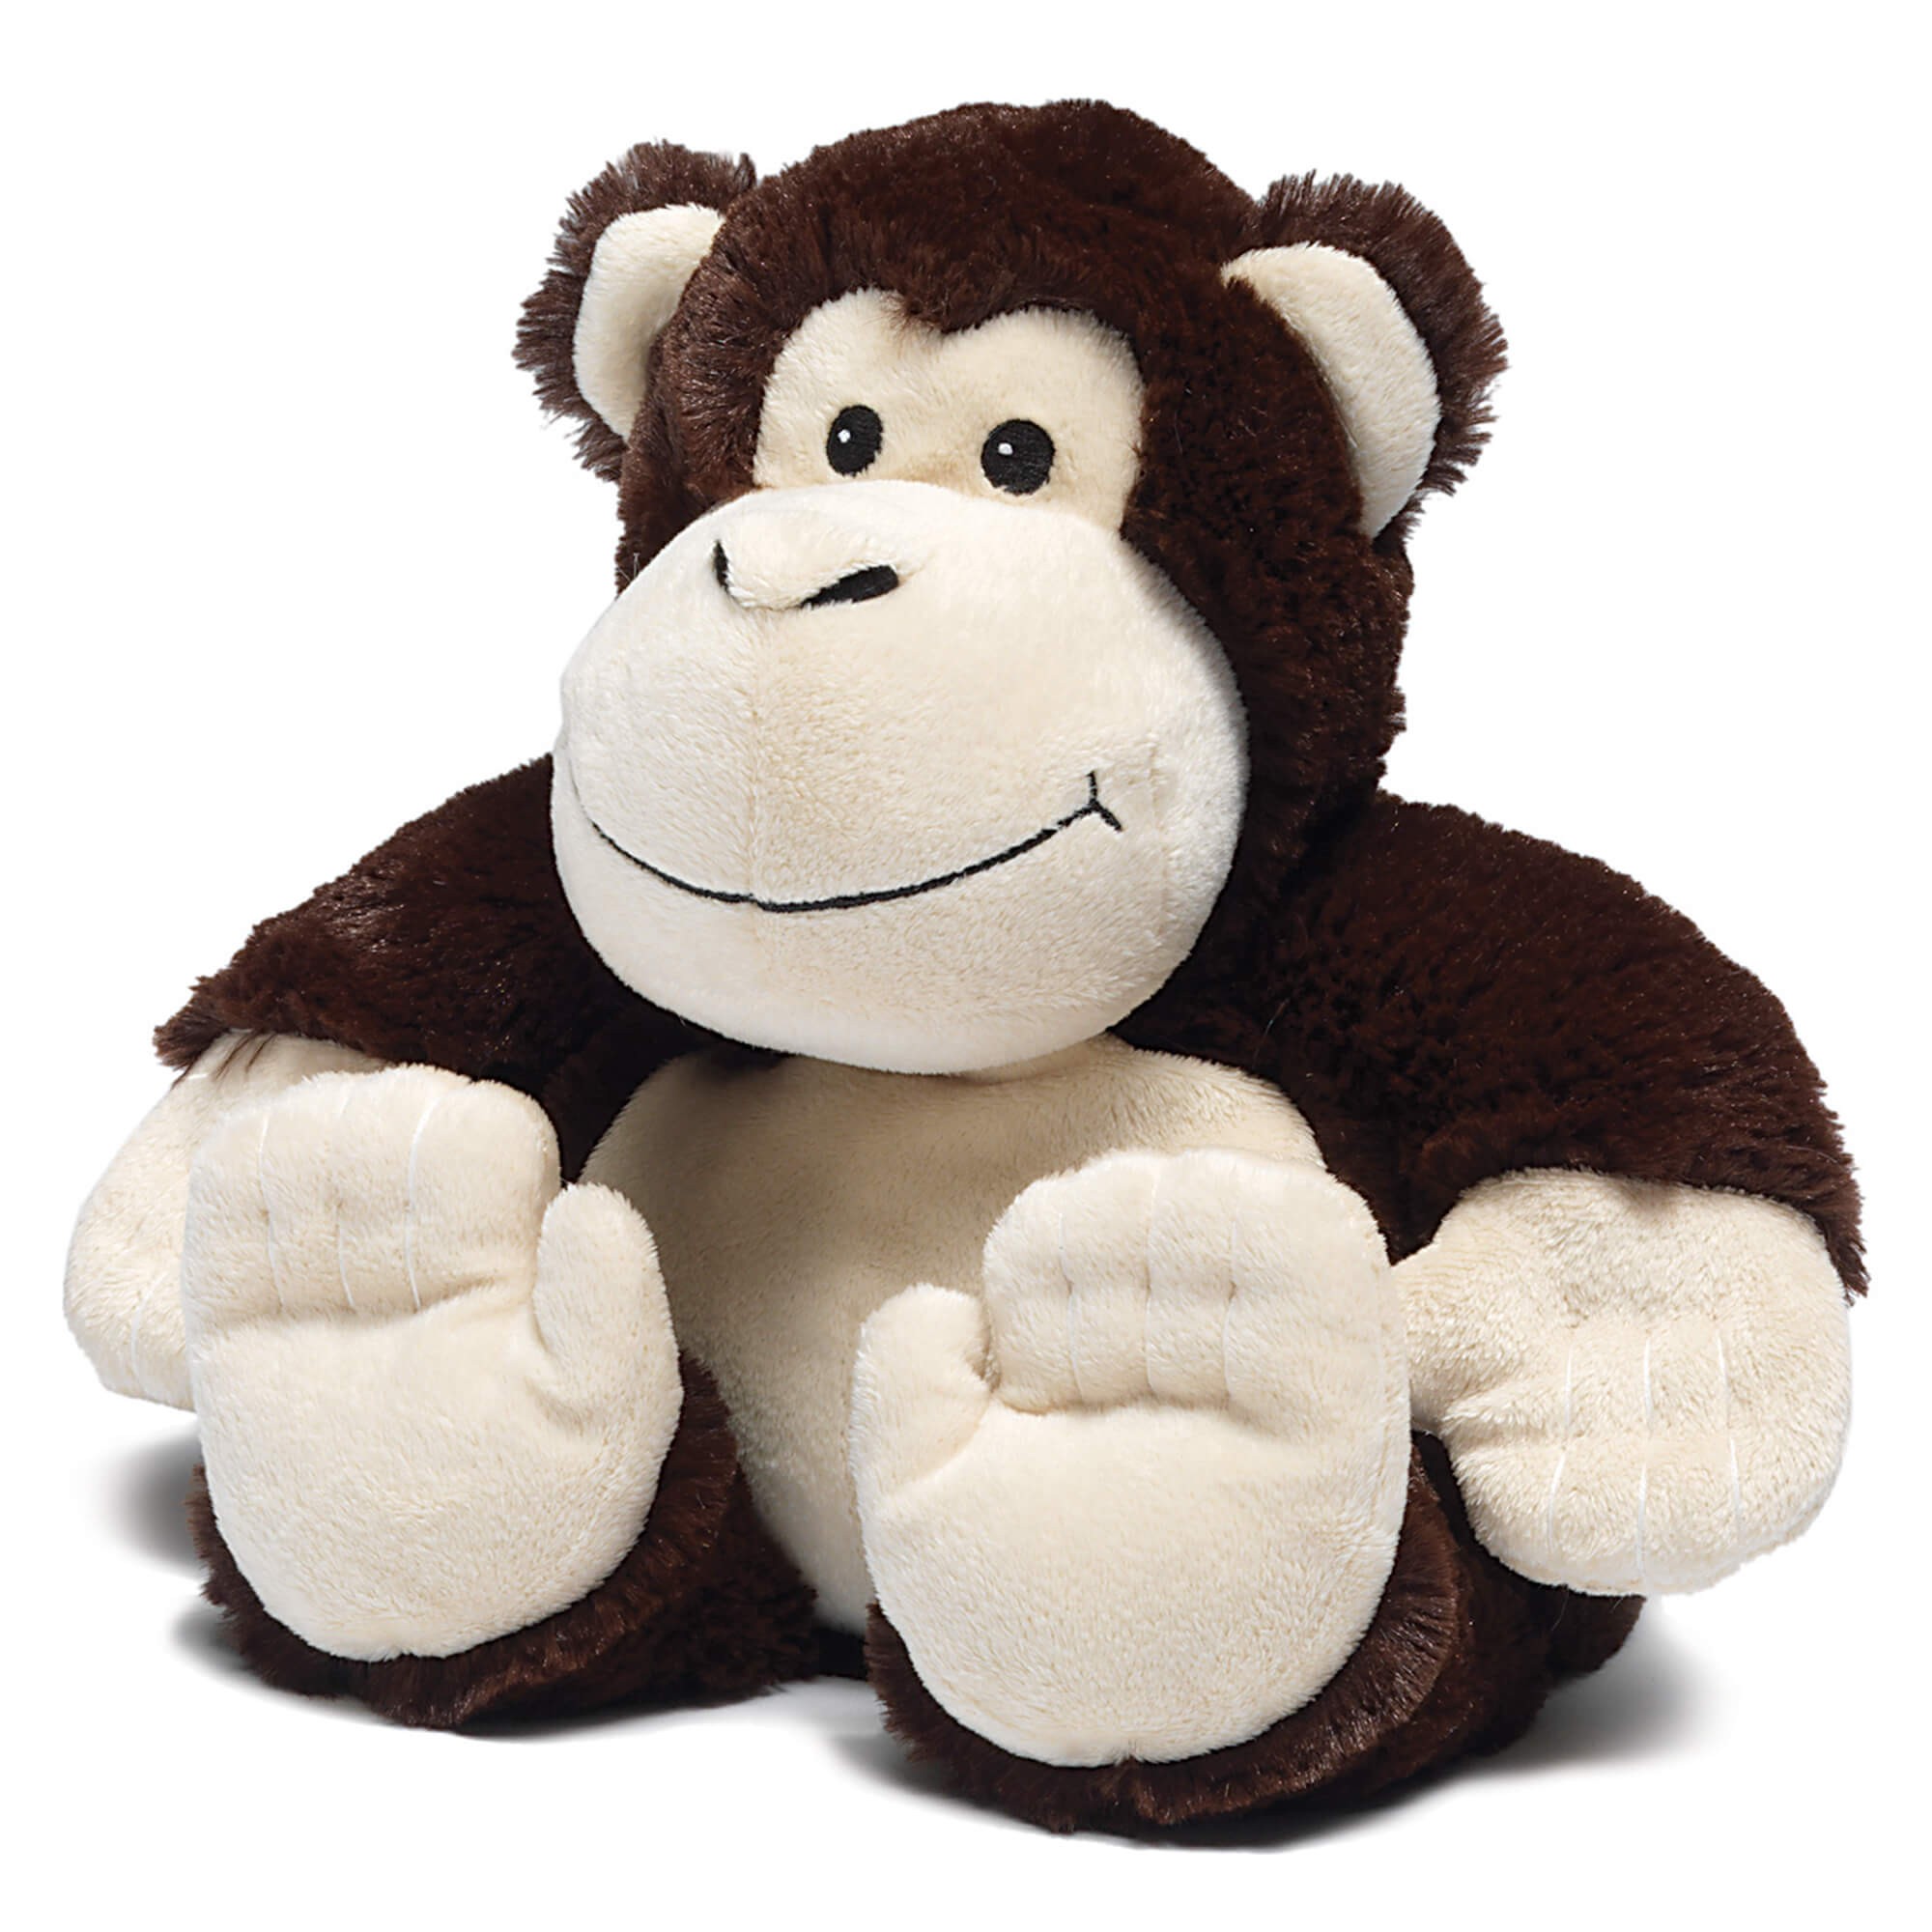 Heated Sloth Plush: A soft plush toy with a microwavable pouch for warmth.